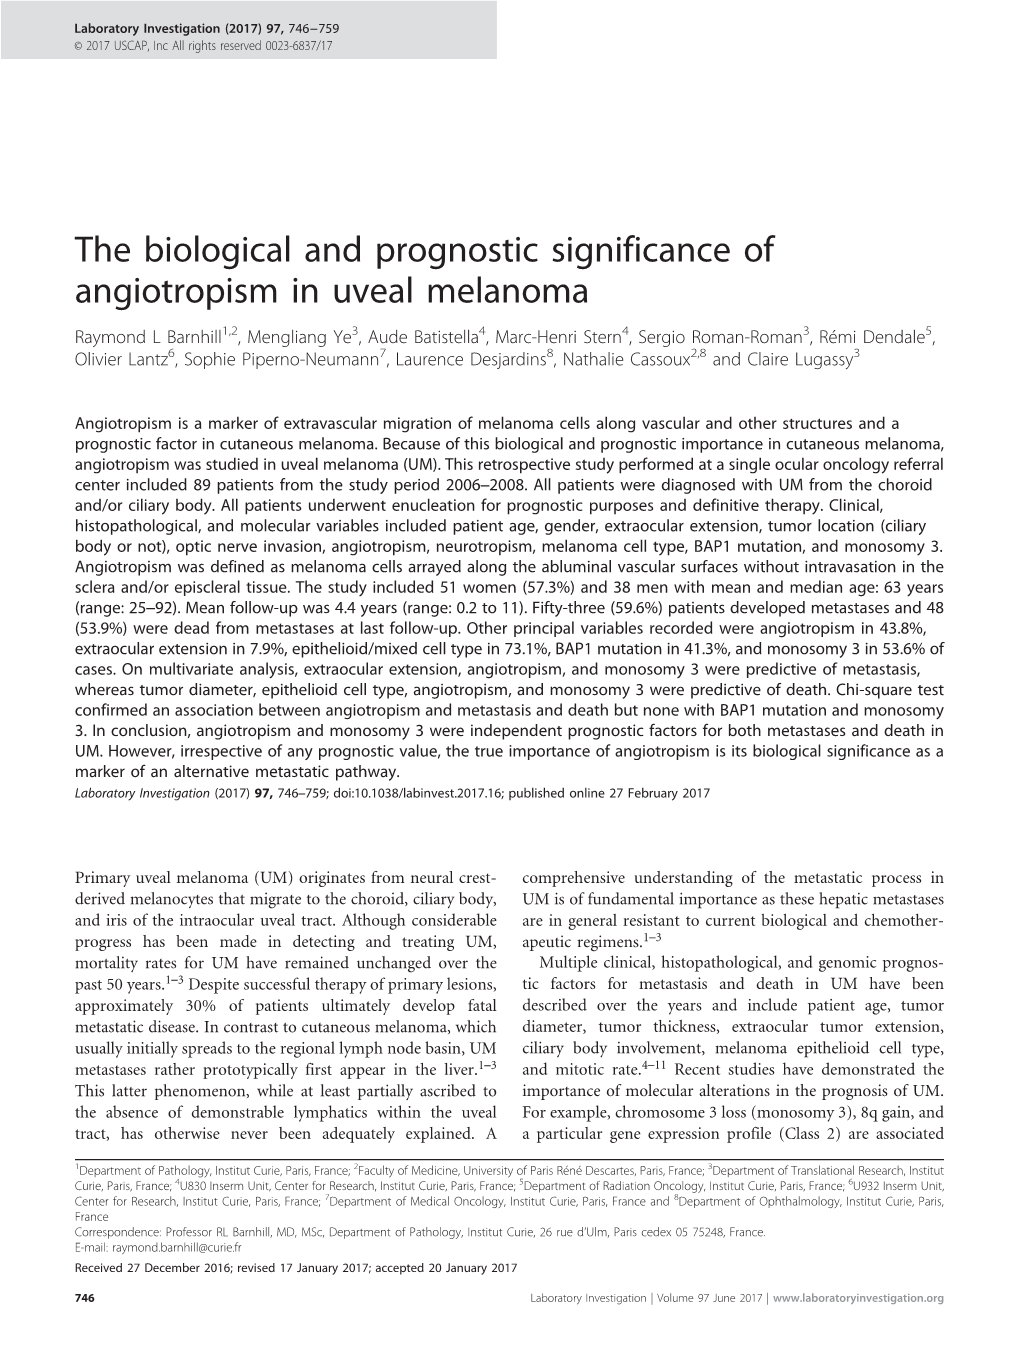 The Biological and Prognostic Significance of Angiotropism In